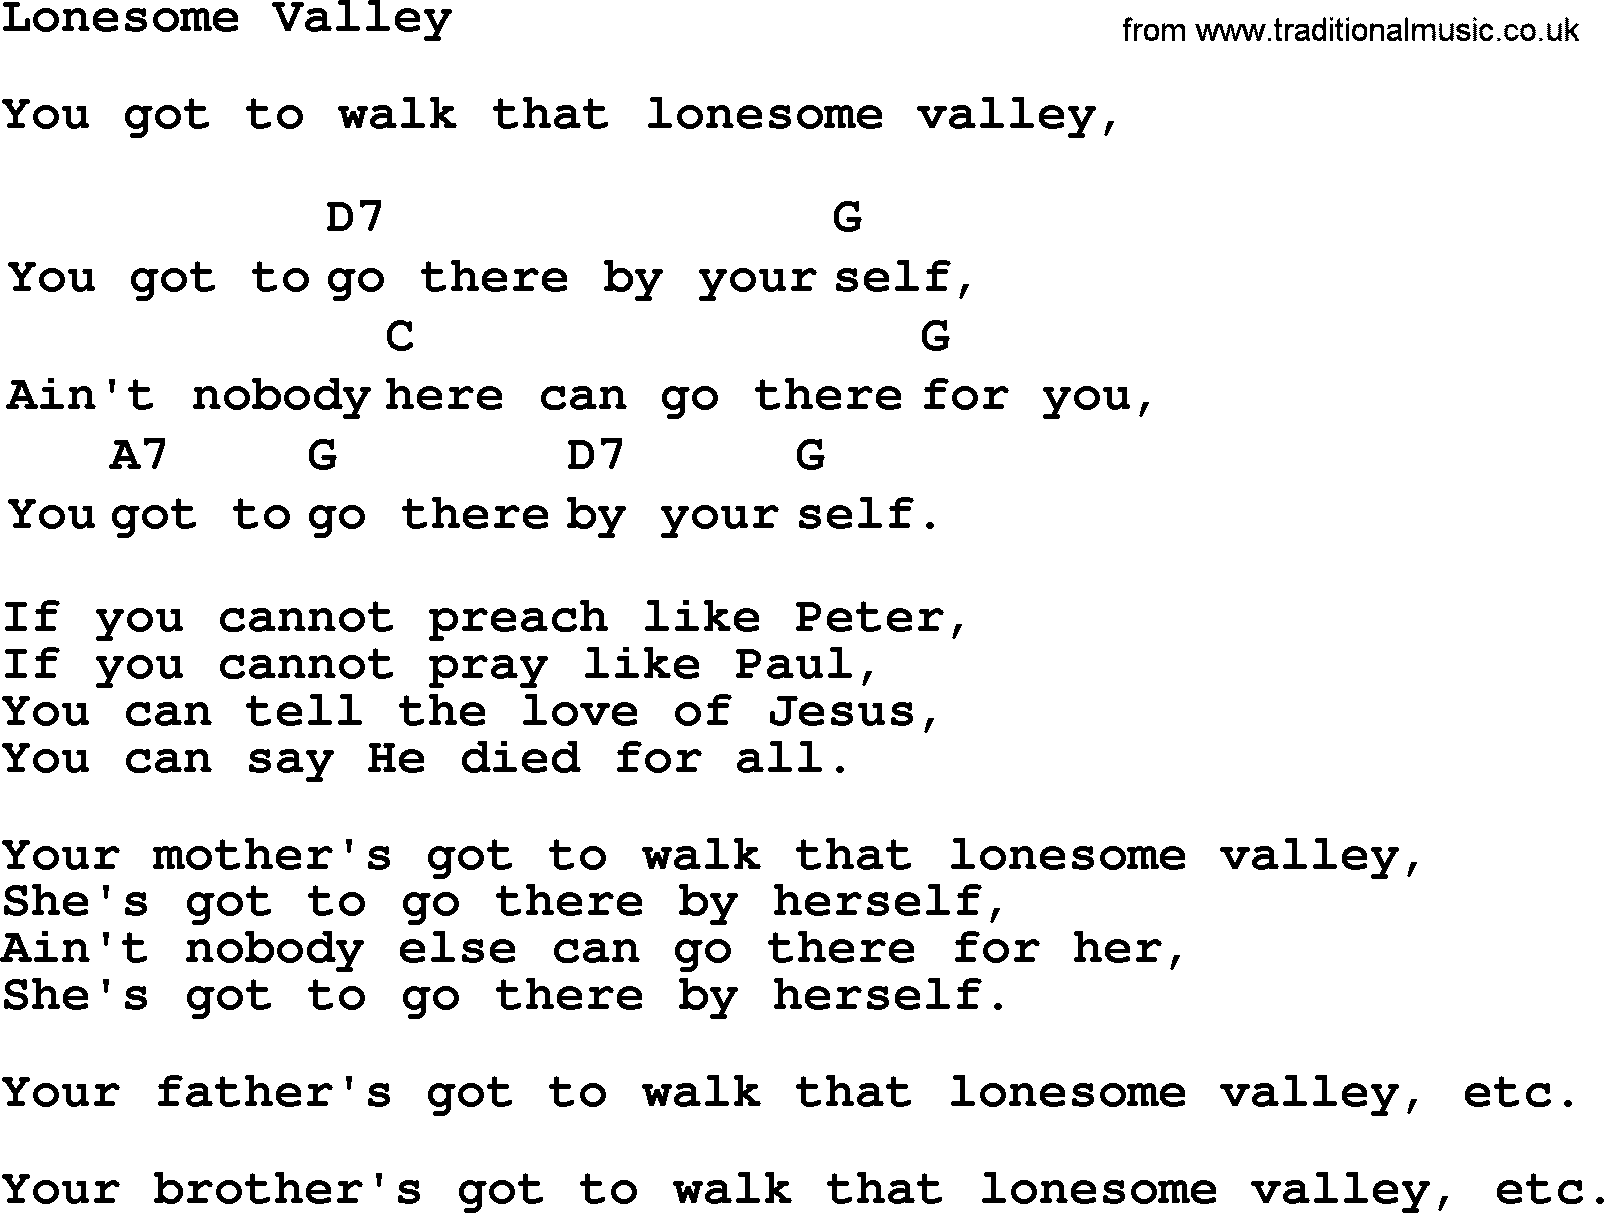 Top 1000 Most Popular Folk and Old-time Songs: Lonesome Valley, lyrics and chords